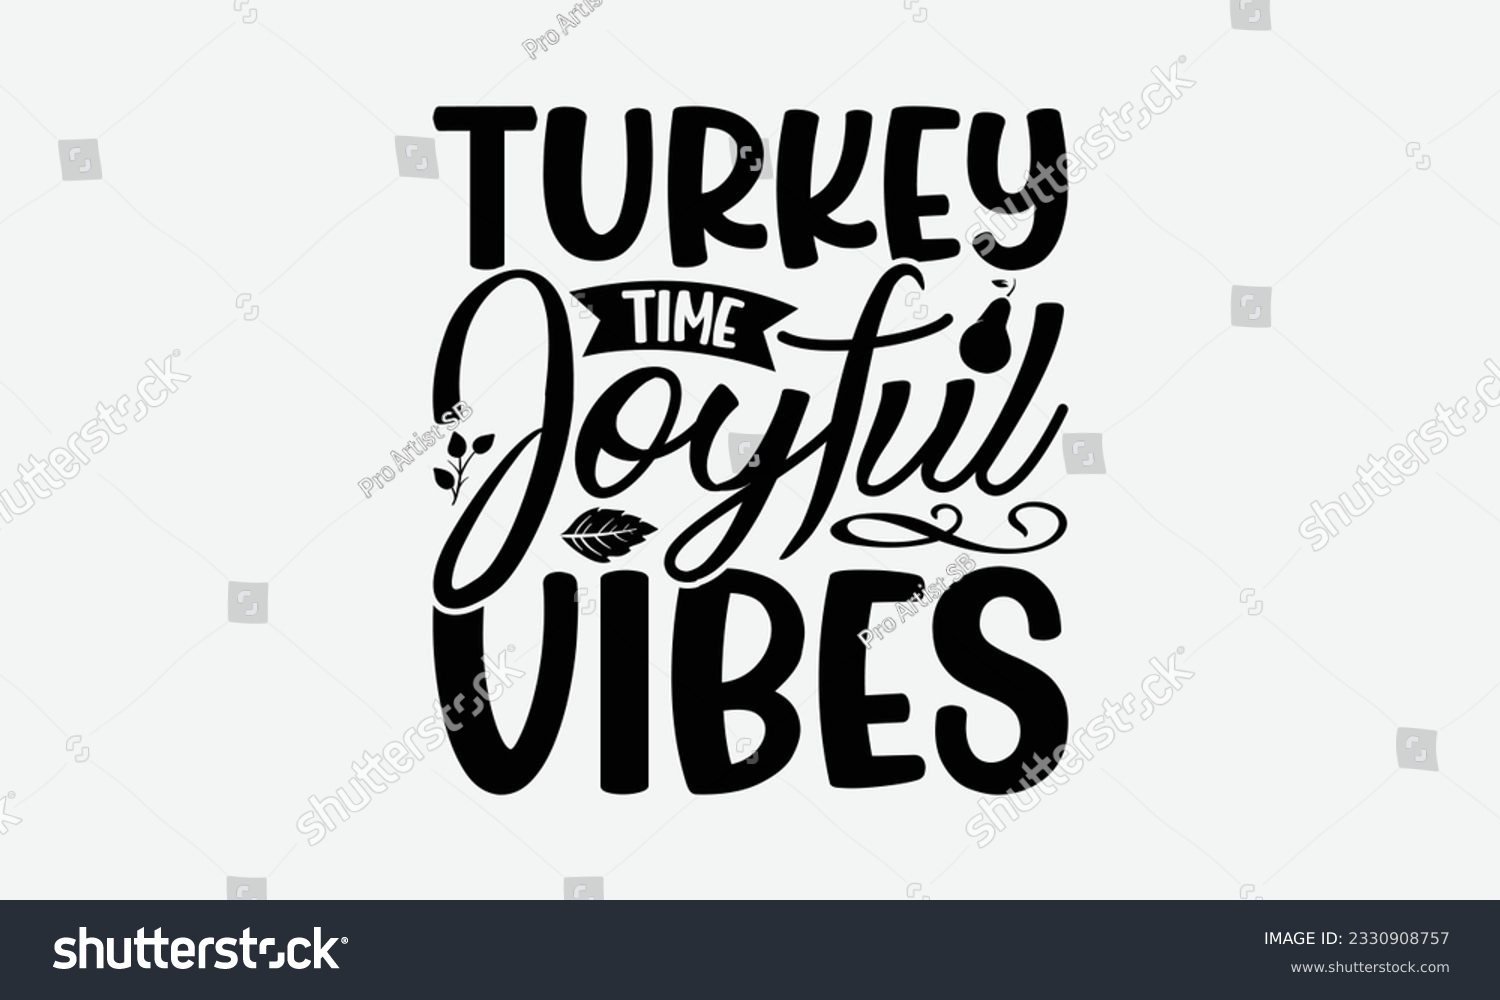 SVG of Turkey Time Joyful Vibes - Thanksgiving T-shirt Design Template, Thanksgiving Quotes File, Hand Drawn Lettering Phrase, SVG Files for Cutting Cricut and Silhouette. svg